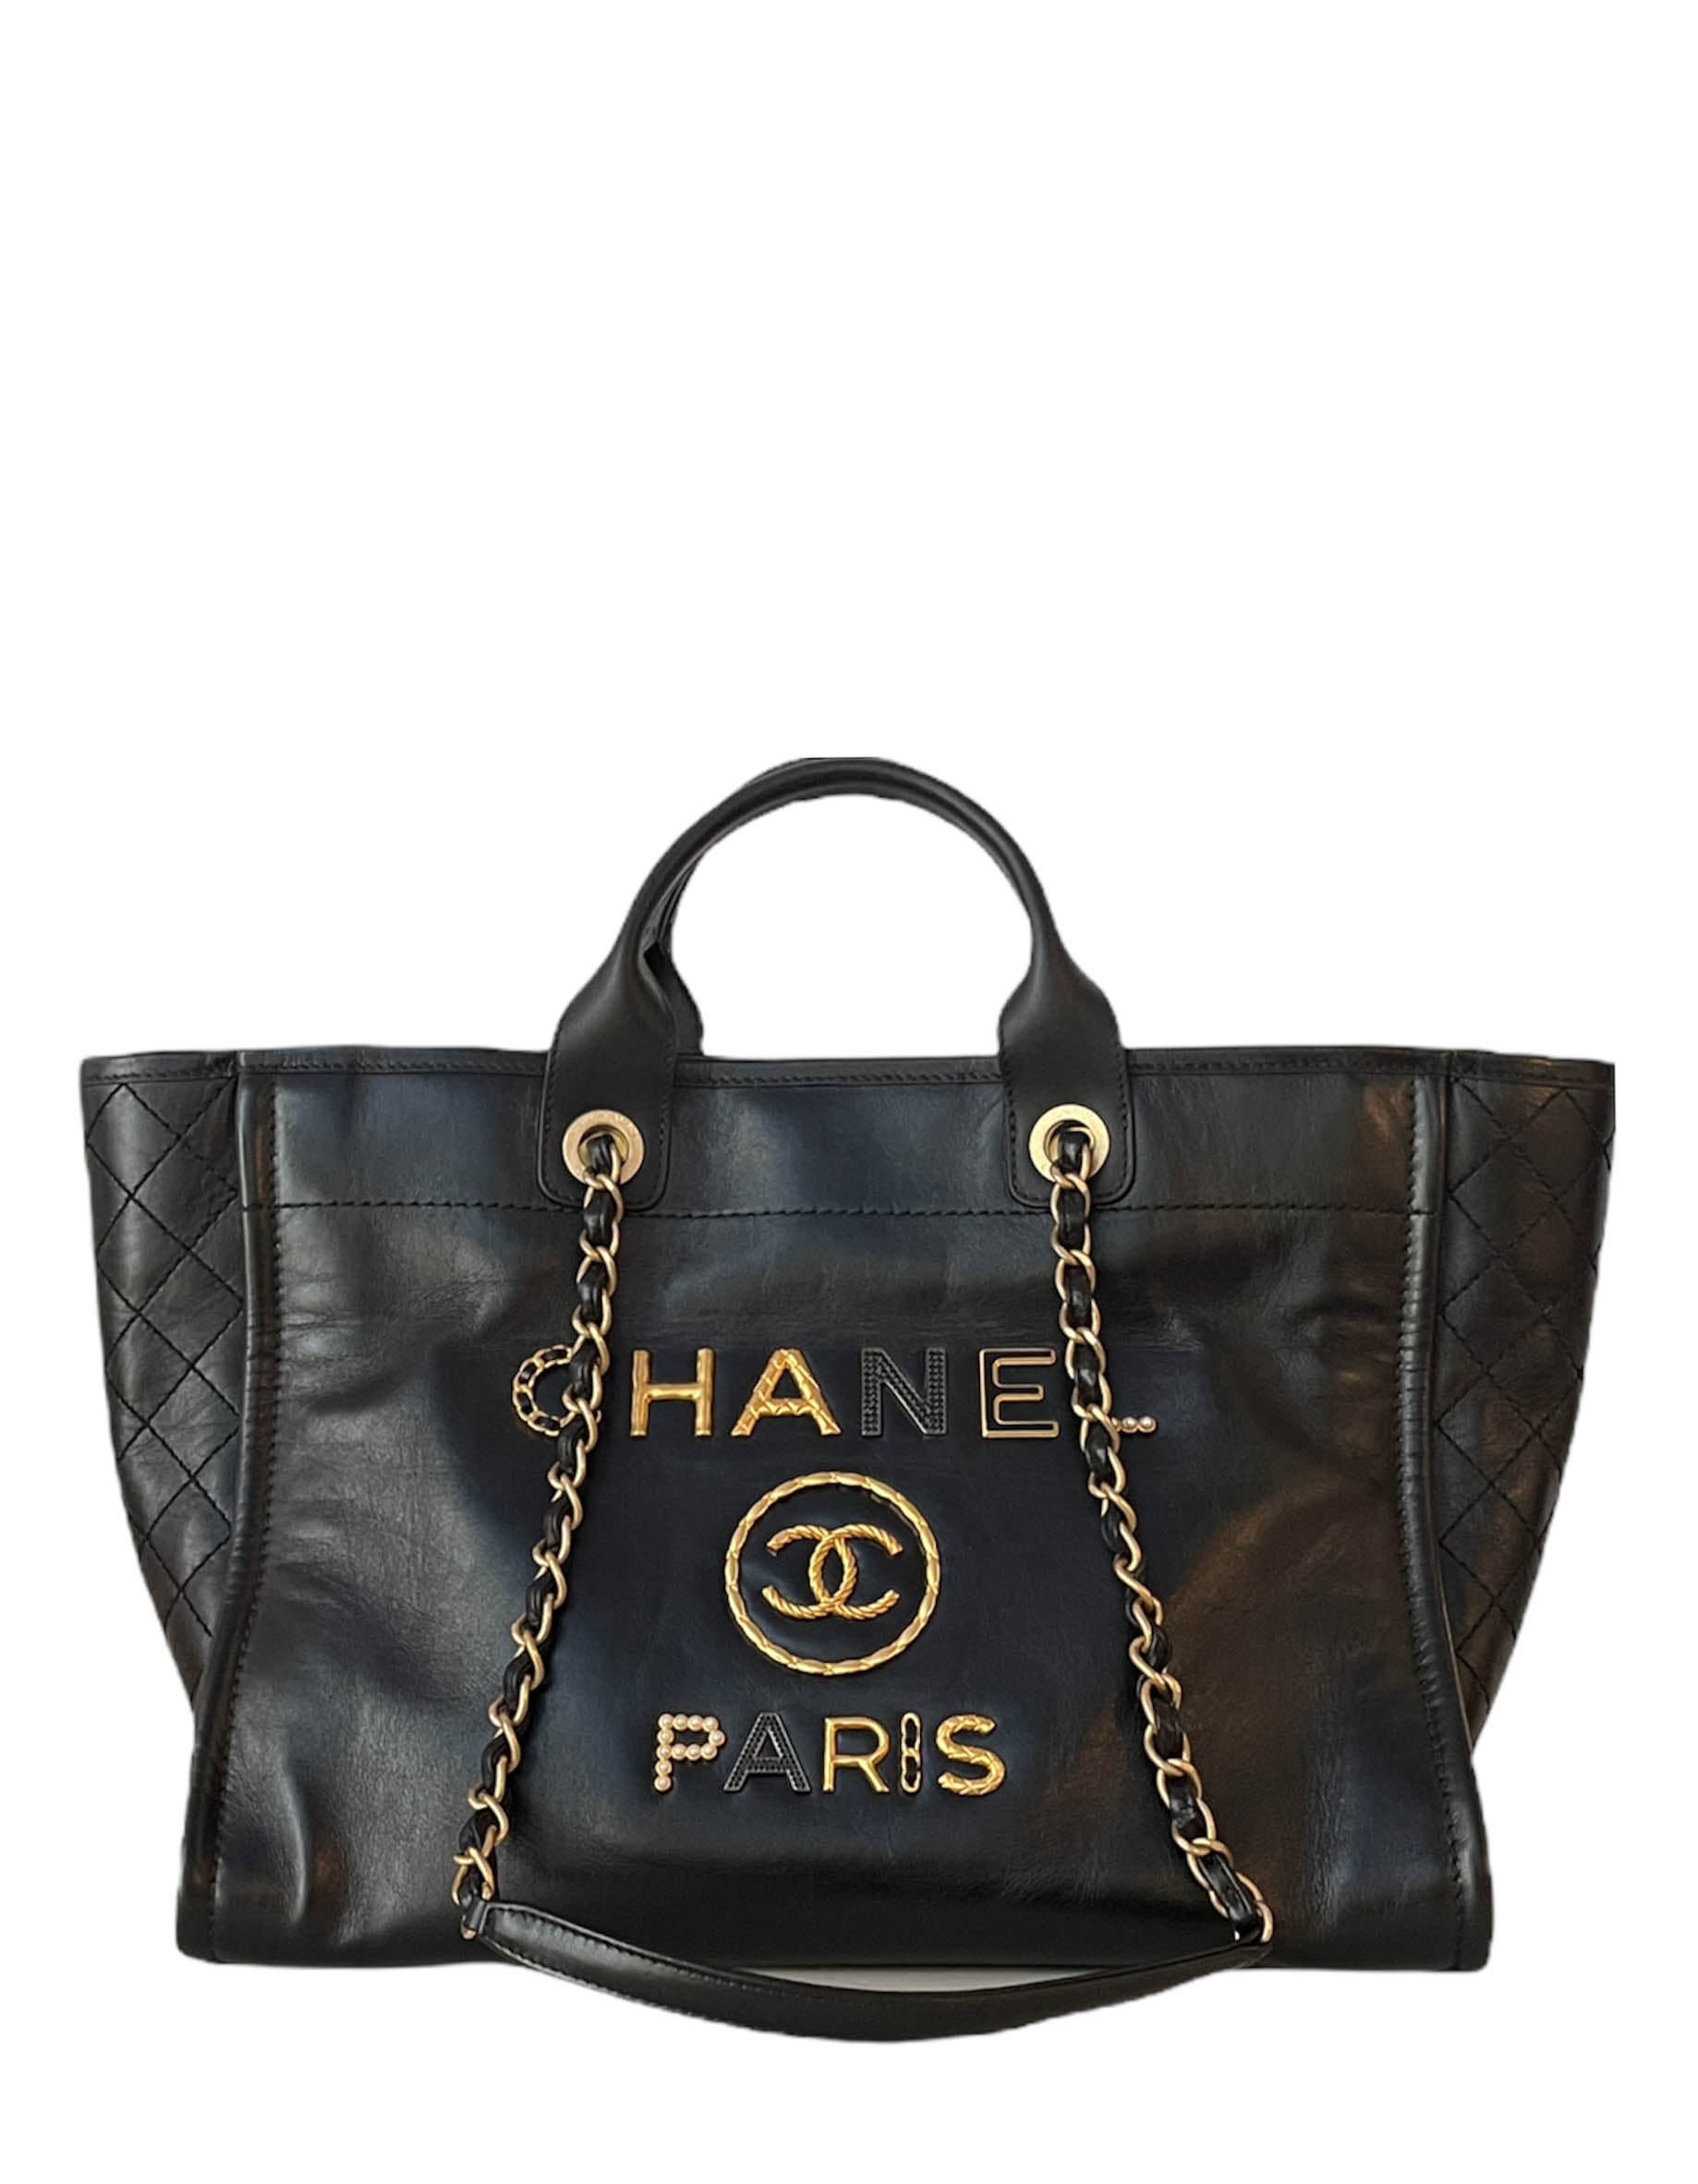 Chanel Black Aged Calfskin Leather Medium Charms Deauville Tote Bag